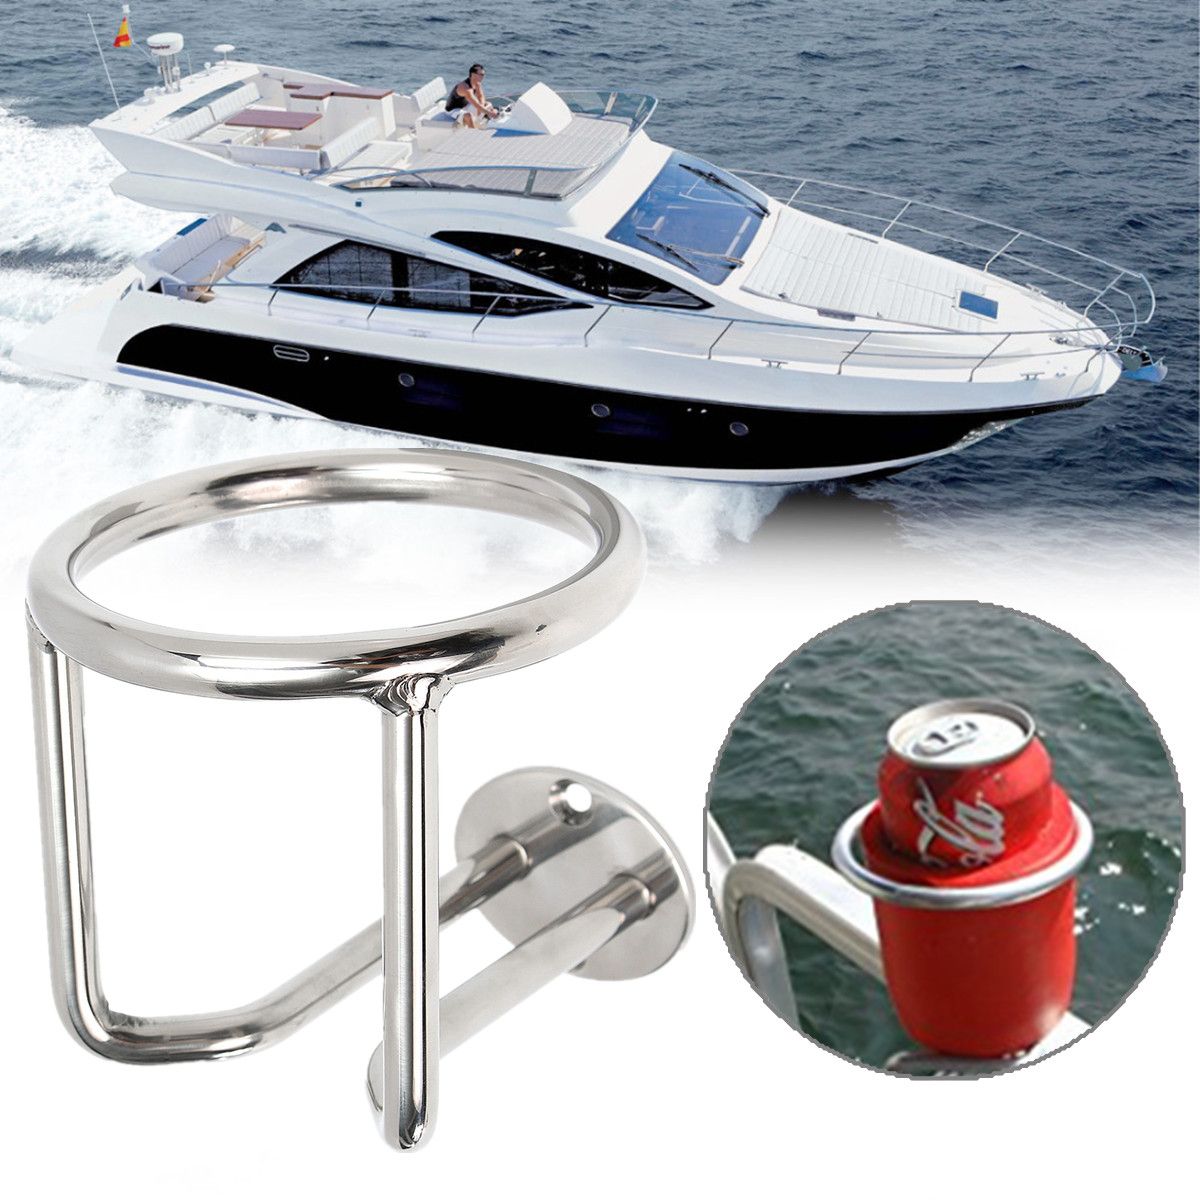 316-Stainless-Steel-Drink-Beverage-Bottle-Cup-Holder-Ring-for-Marine-Boat-Yacht-1175544